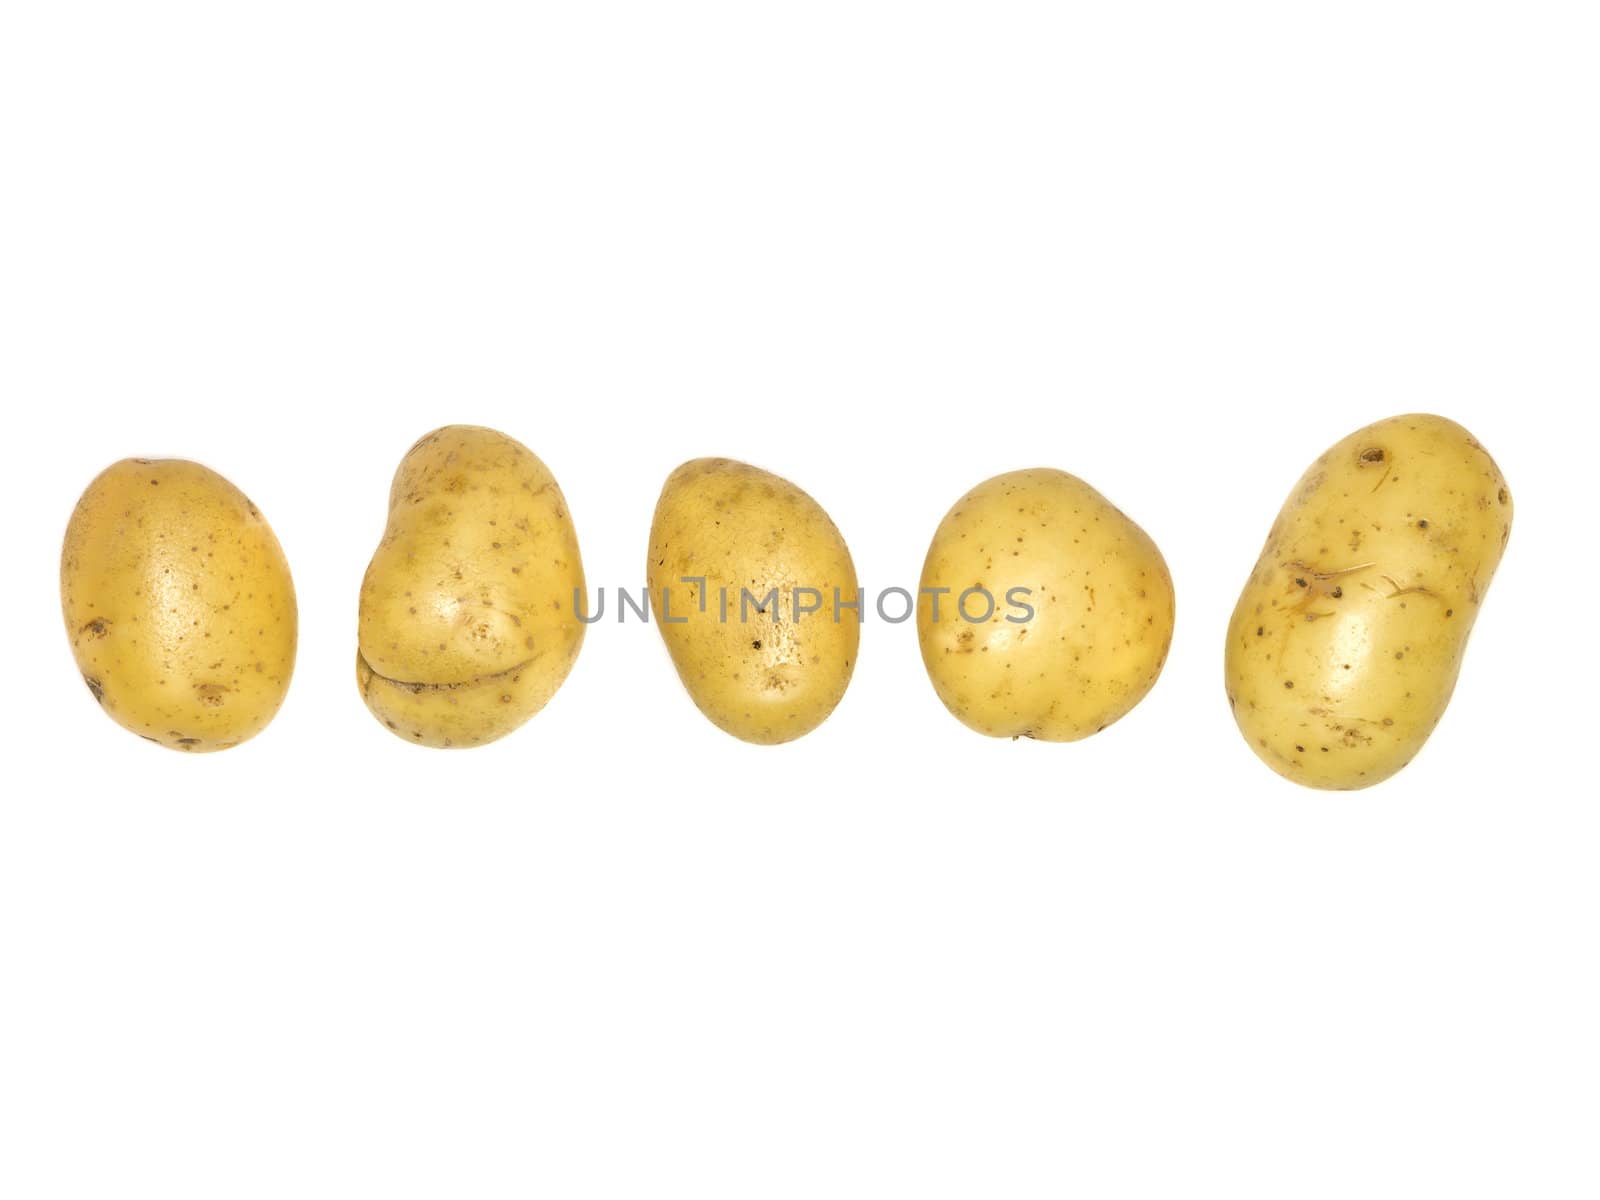 Potatoes on a row isolated on a white background